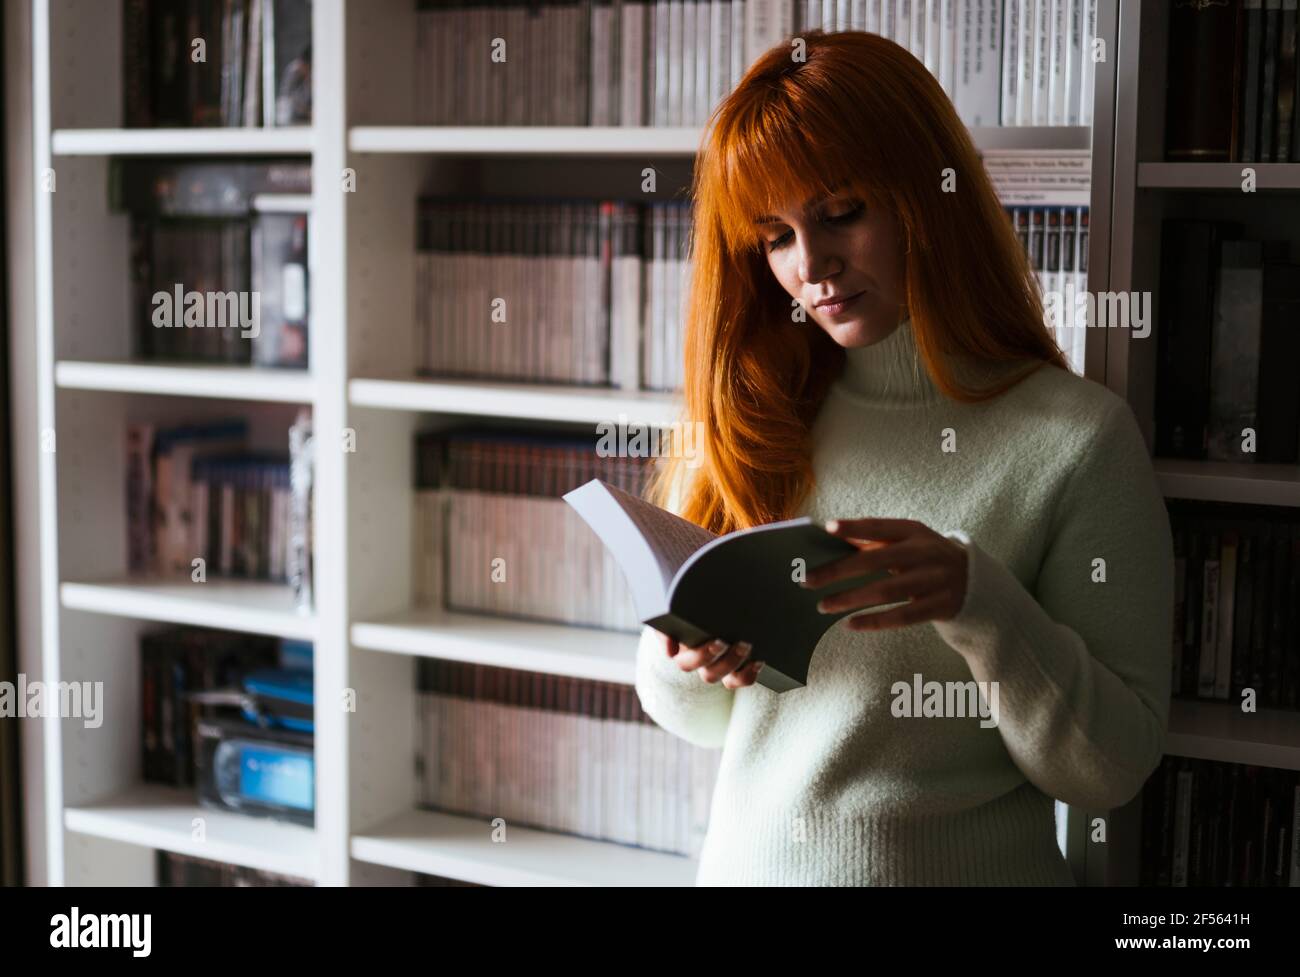 Concentrate woman reading book against shelf at library Stock Photo